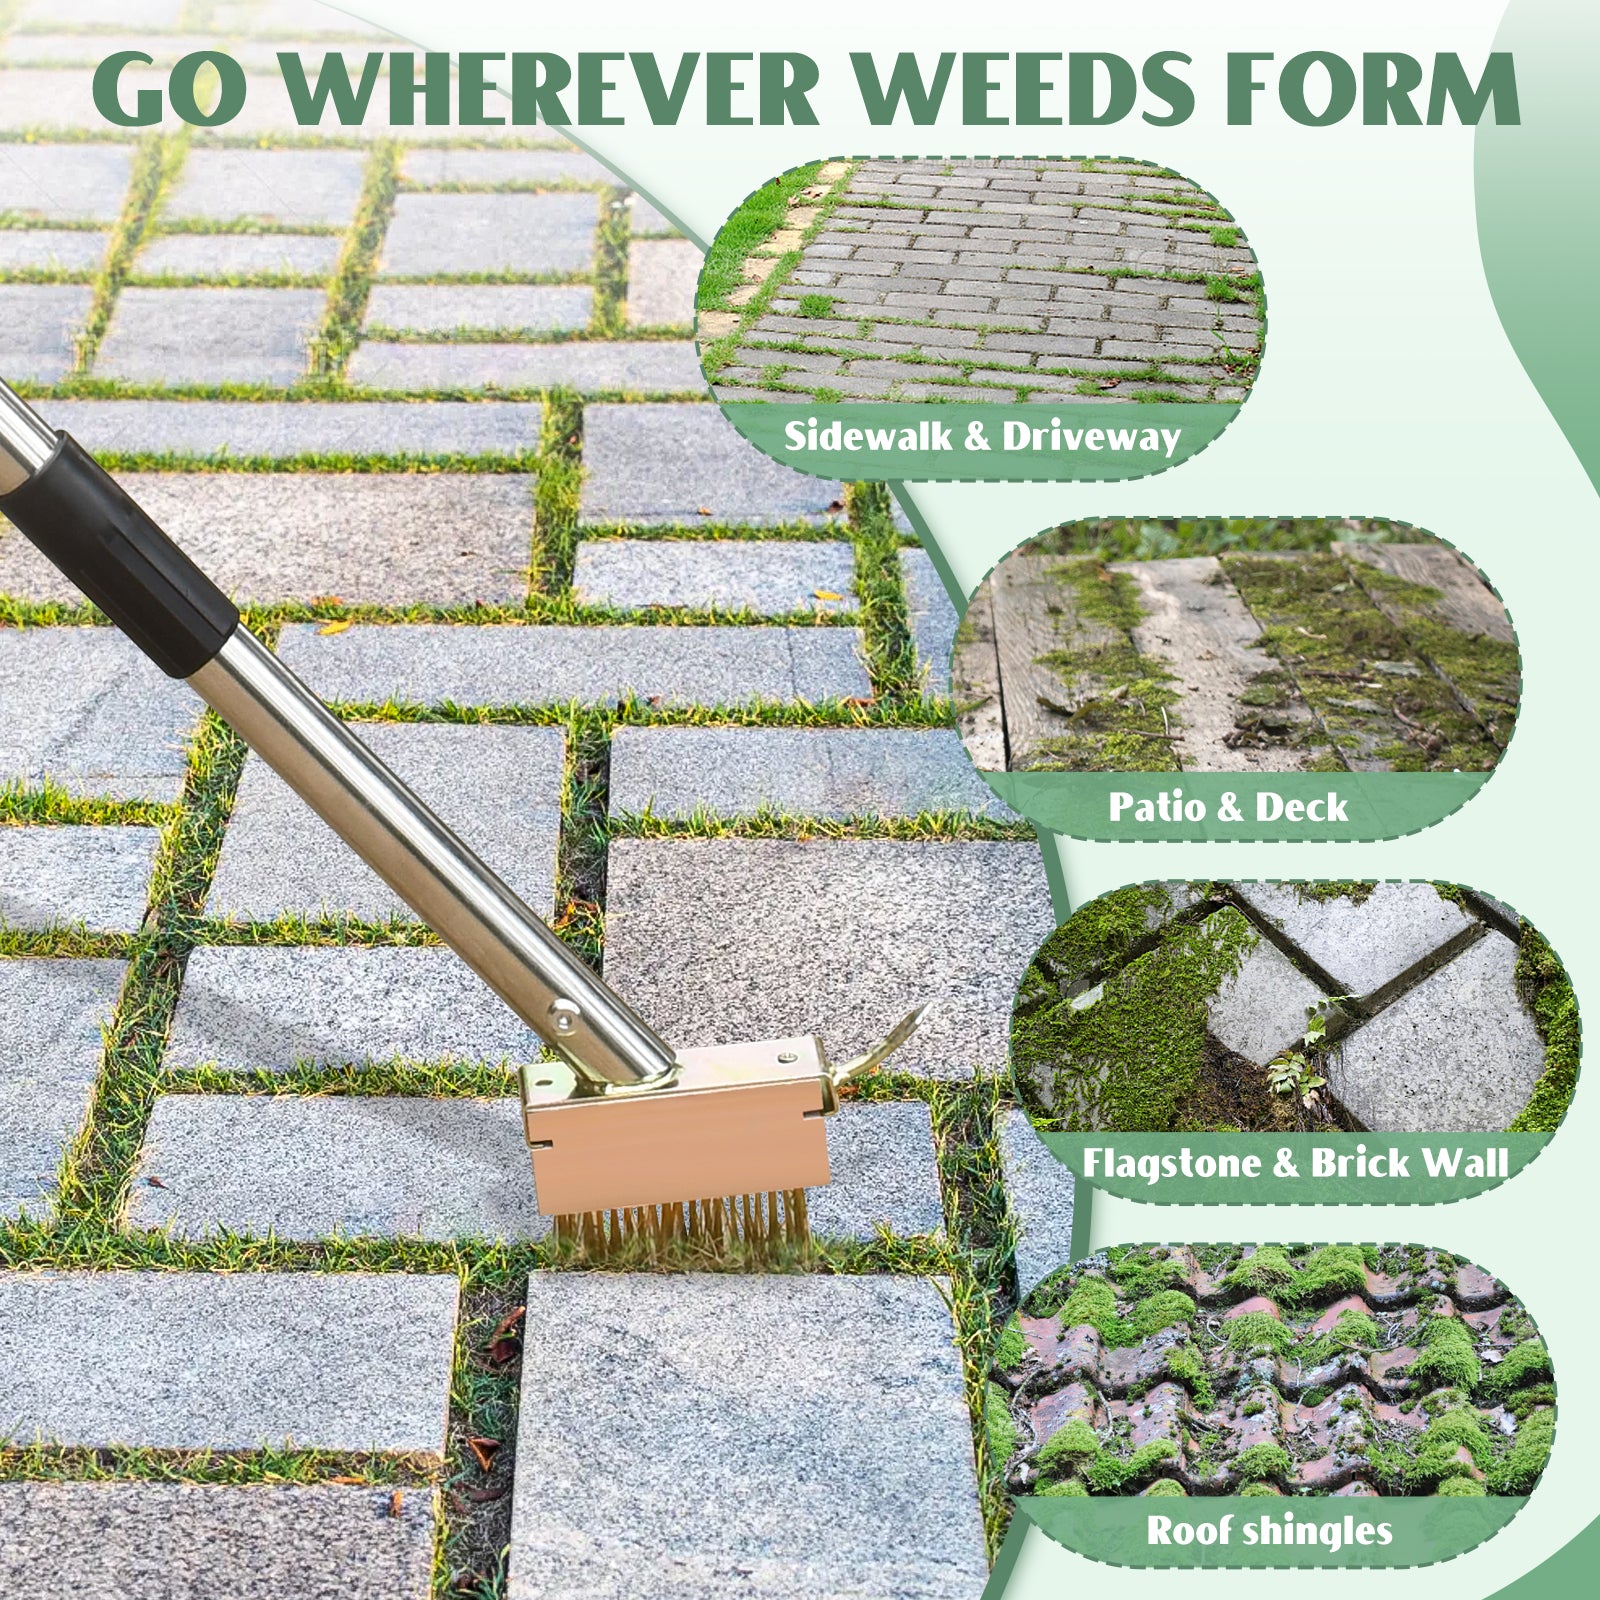 Crack Weeder, Manual Crevice Weeding Tool, Moss Weed Remover Puller Tool Wired Grout Cleaner Brush with Steel Handle for Cleaning Deck, Paver, Patio, Walkway, Driveway Crack - 2 Weed Wire Brush Heads